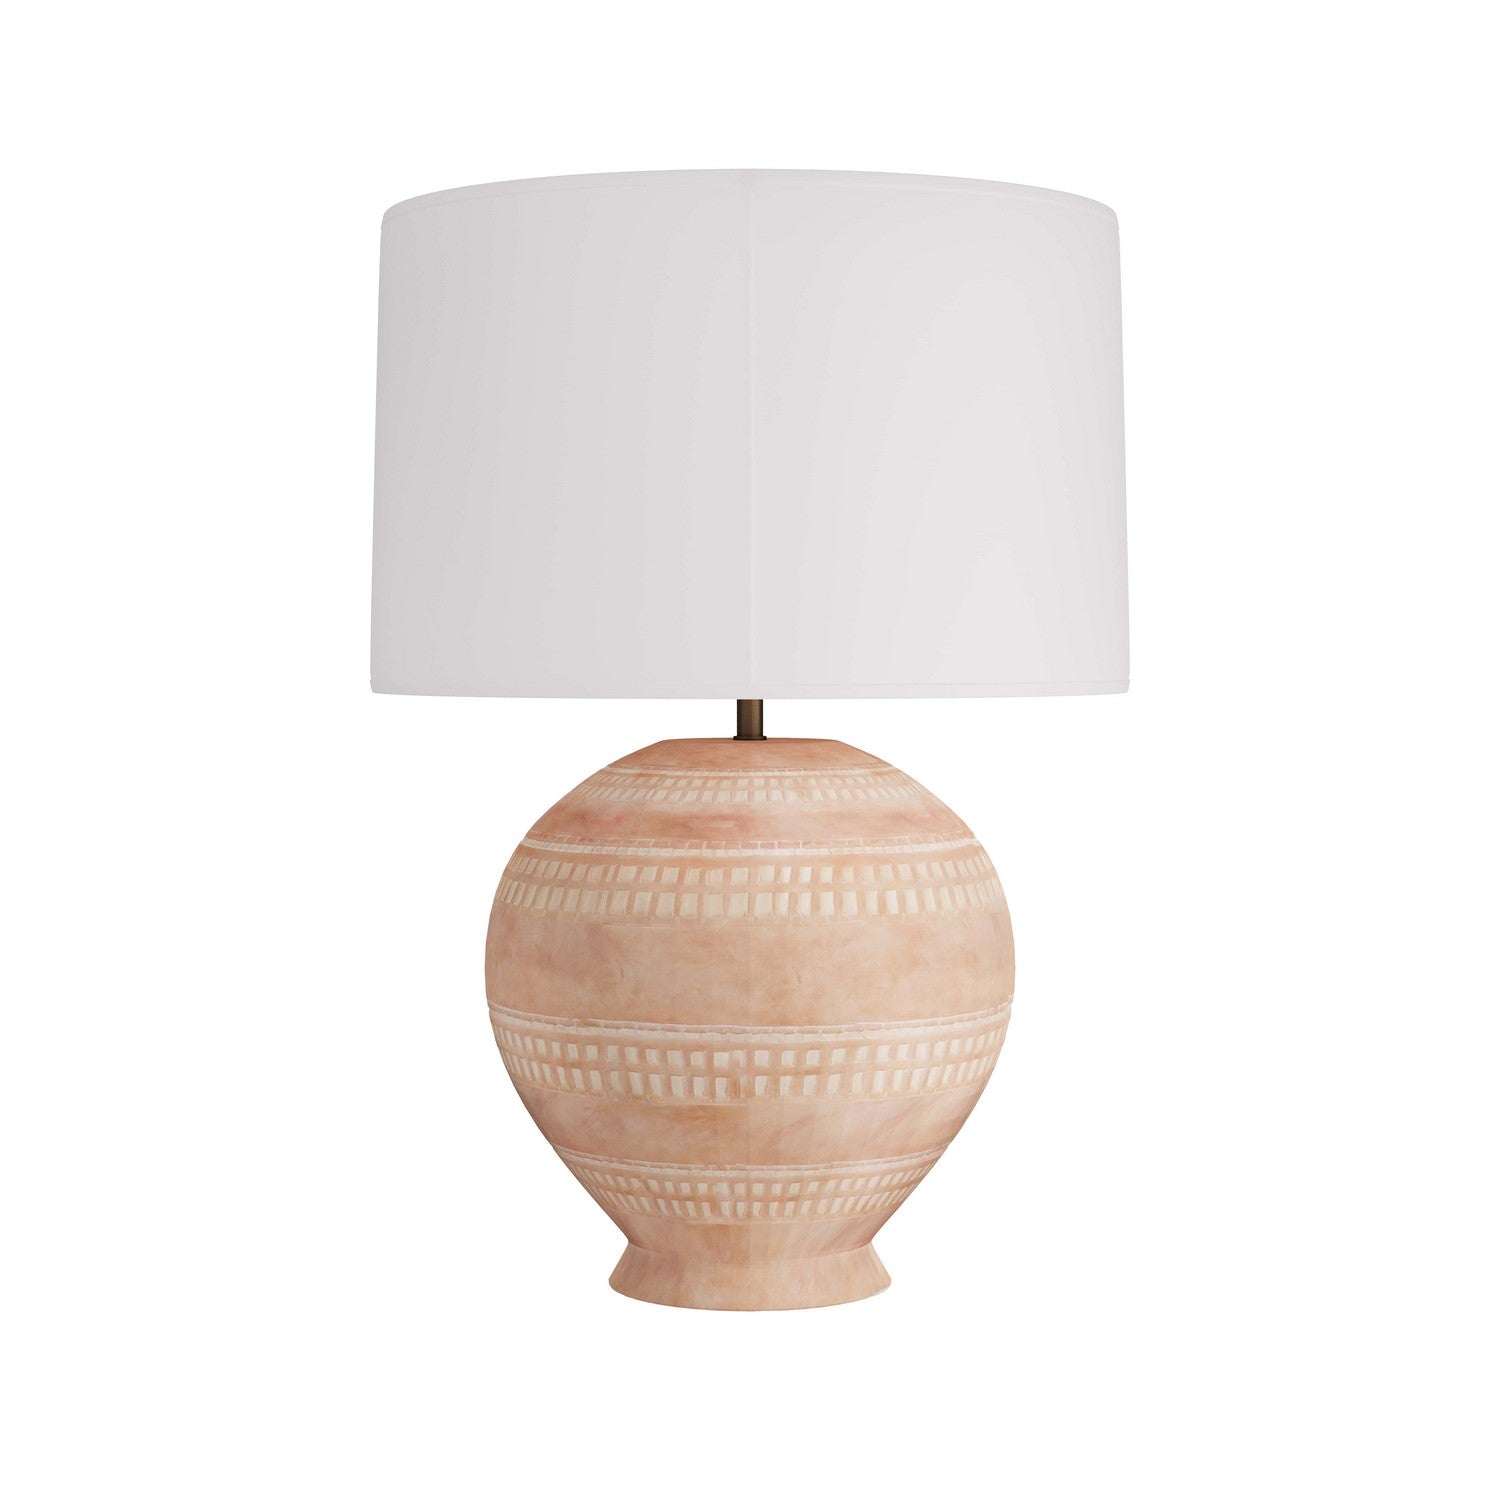 One Light Table Lamp from the Tahoe collection in White Wash Terracotta finish